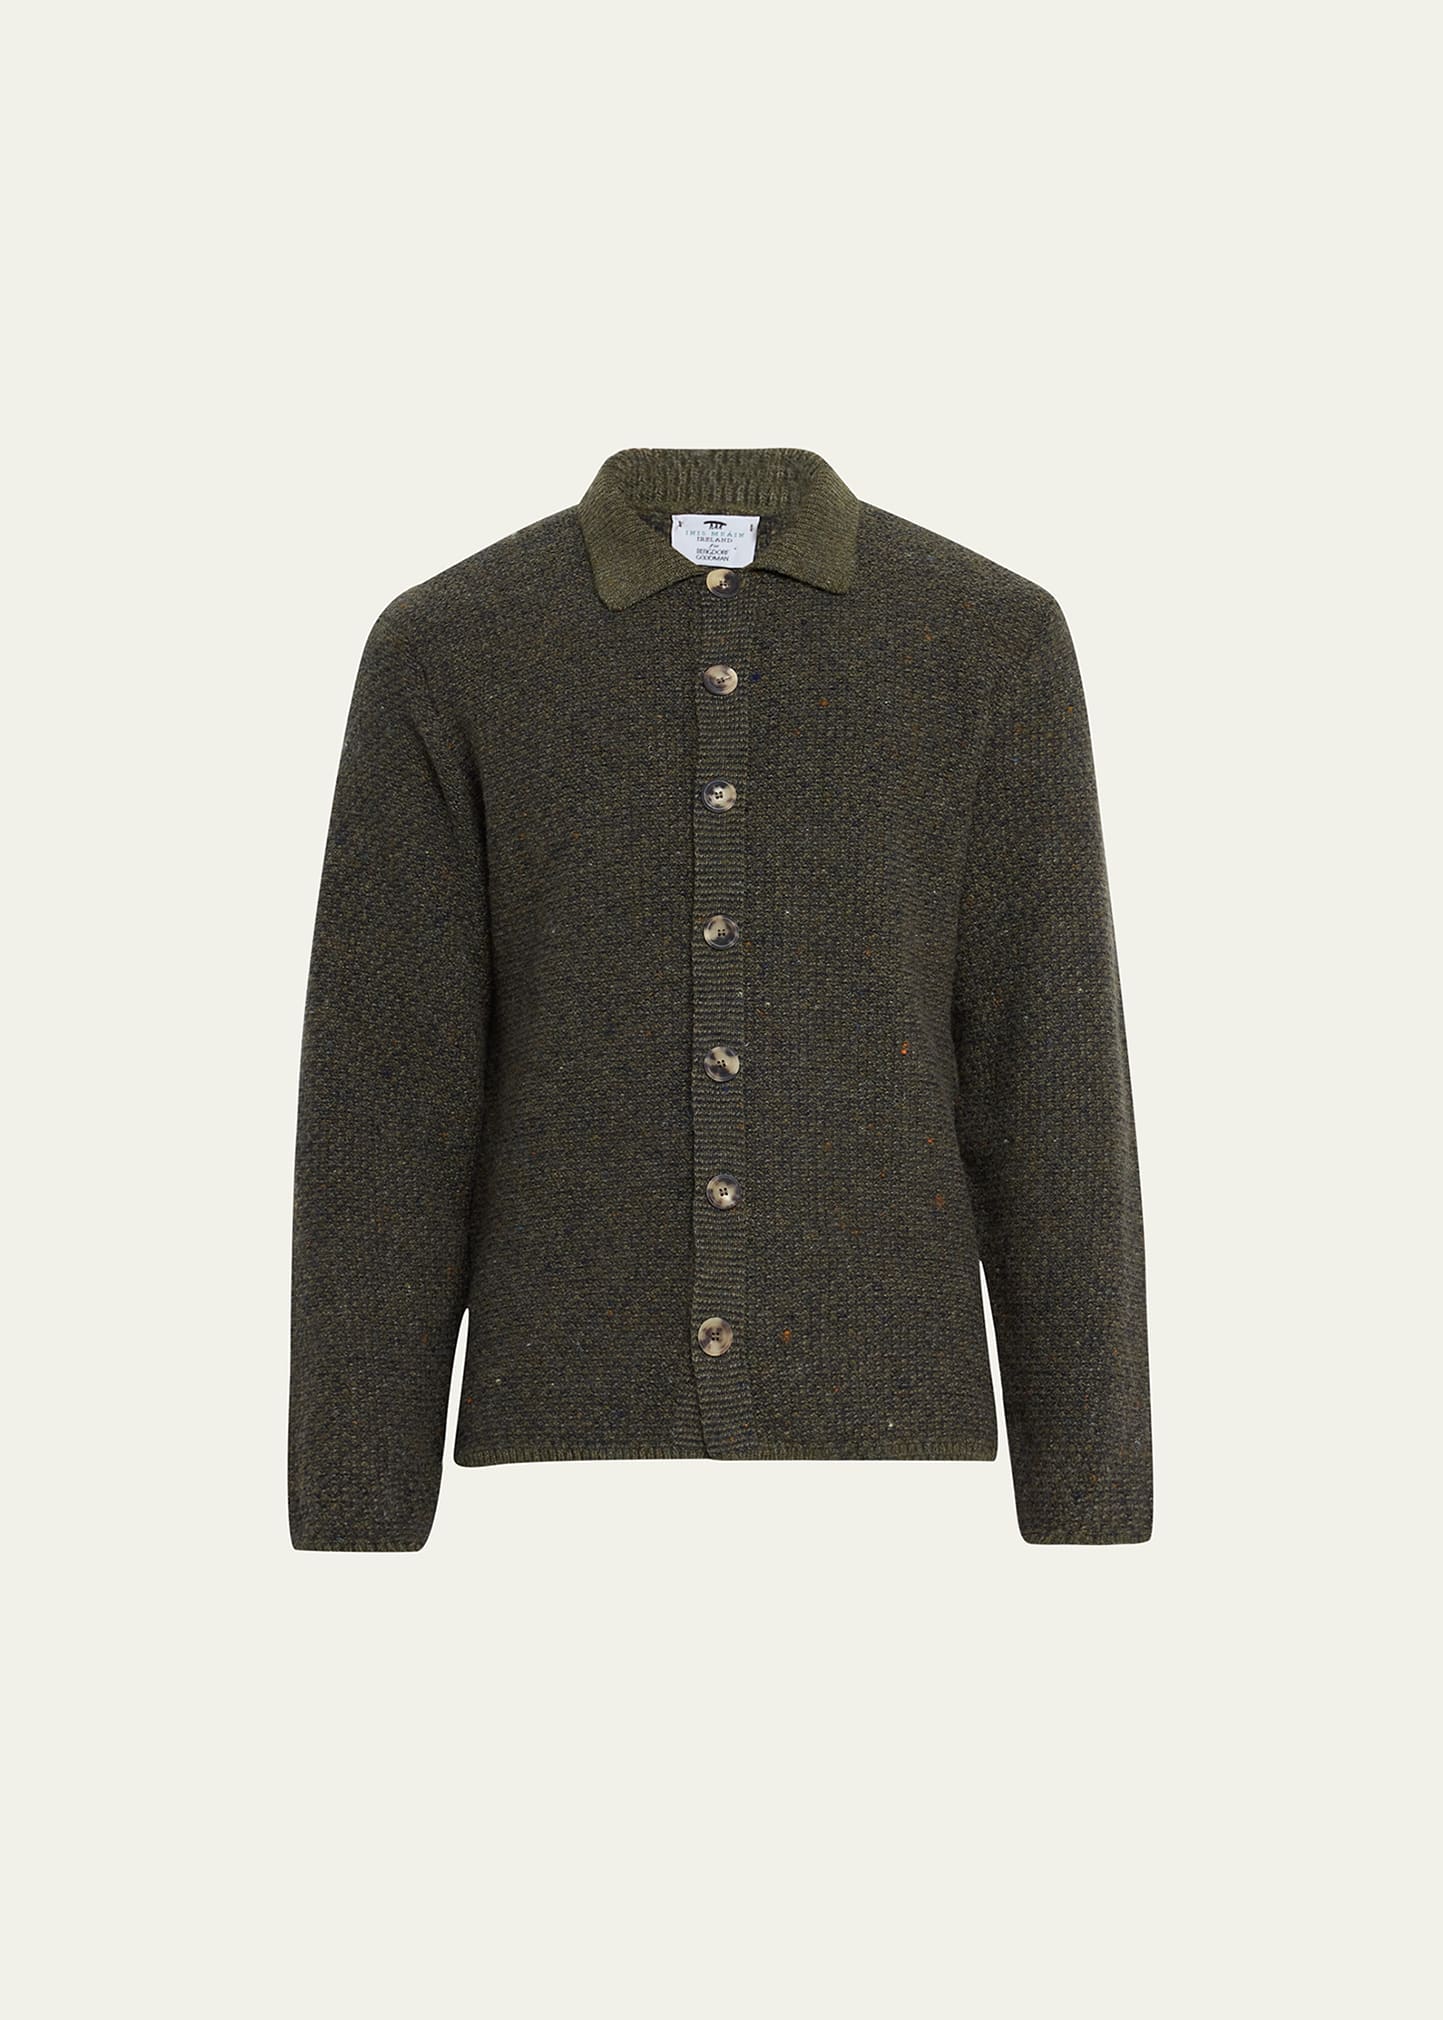 Inis Meain Men's Brieidin Wool-knit Overshirt In 22 Olive